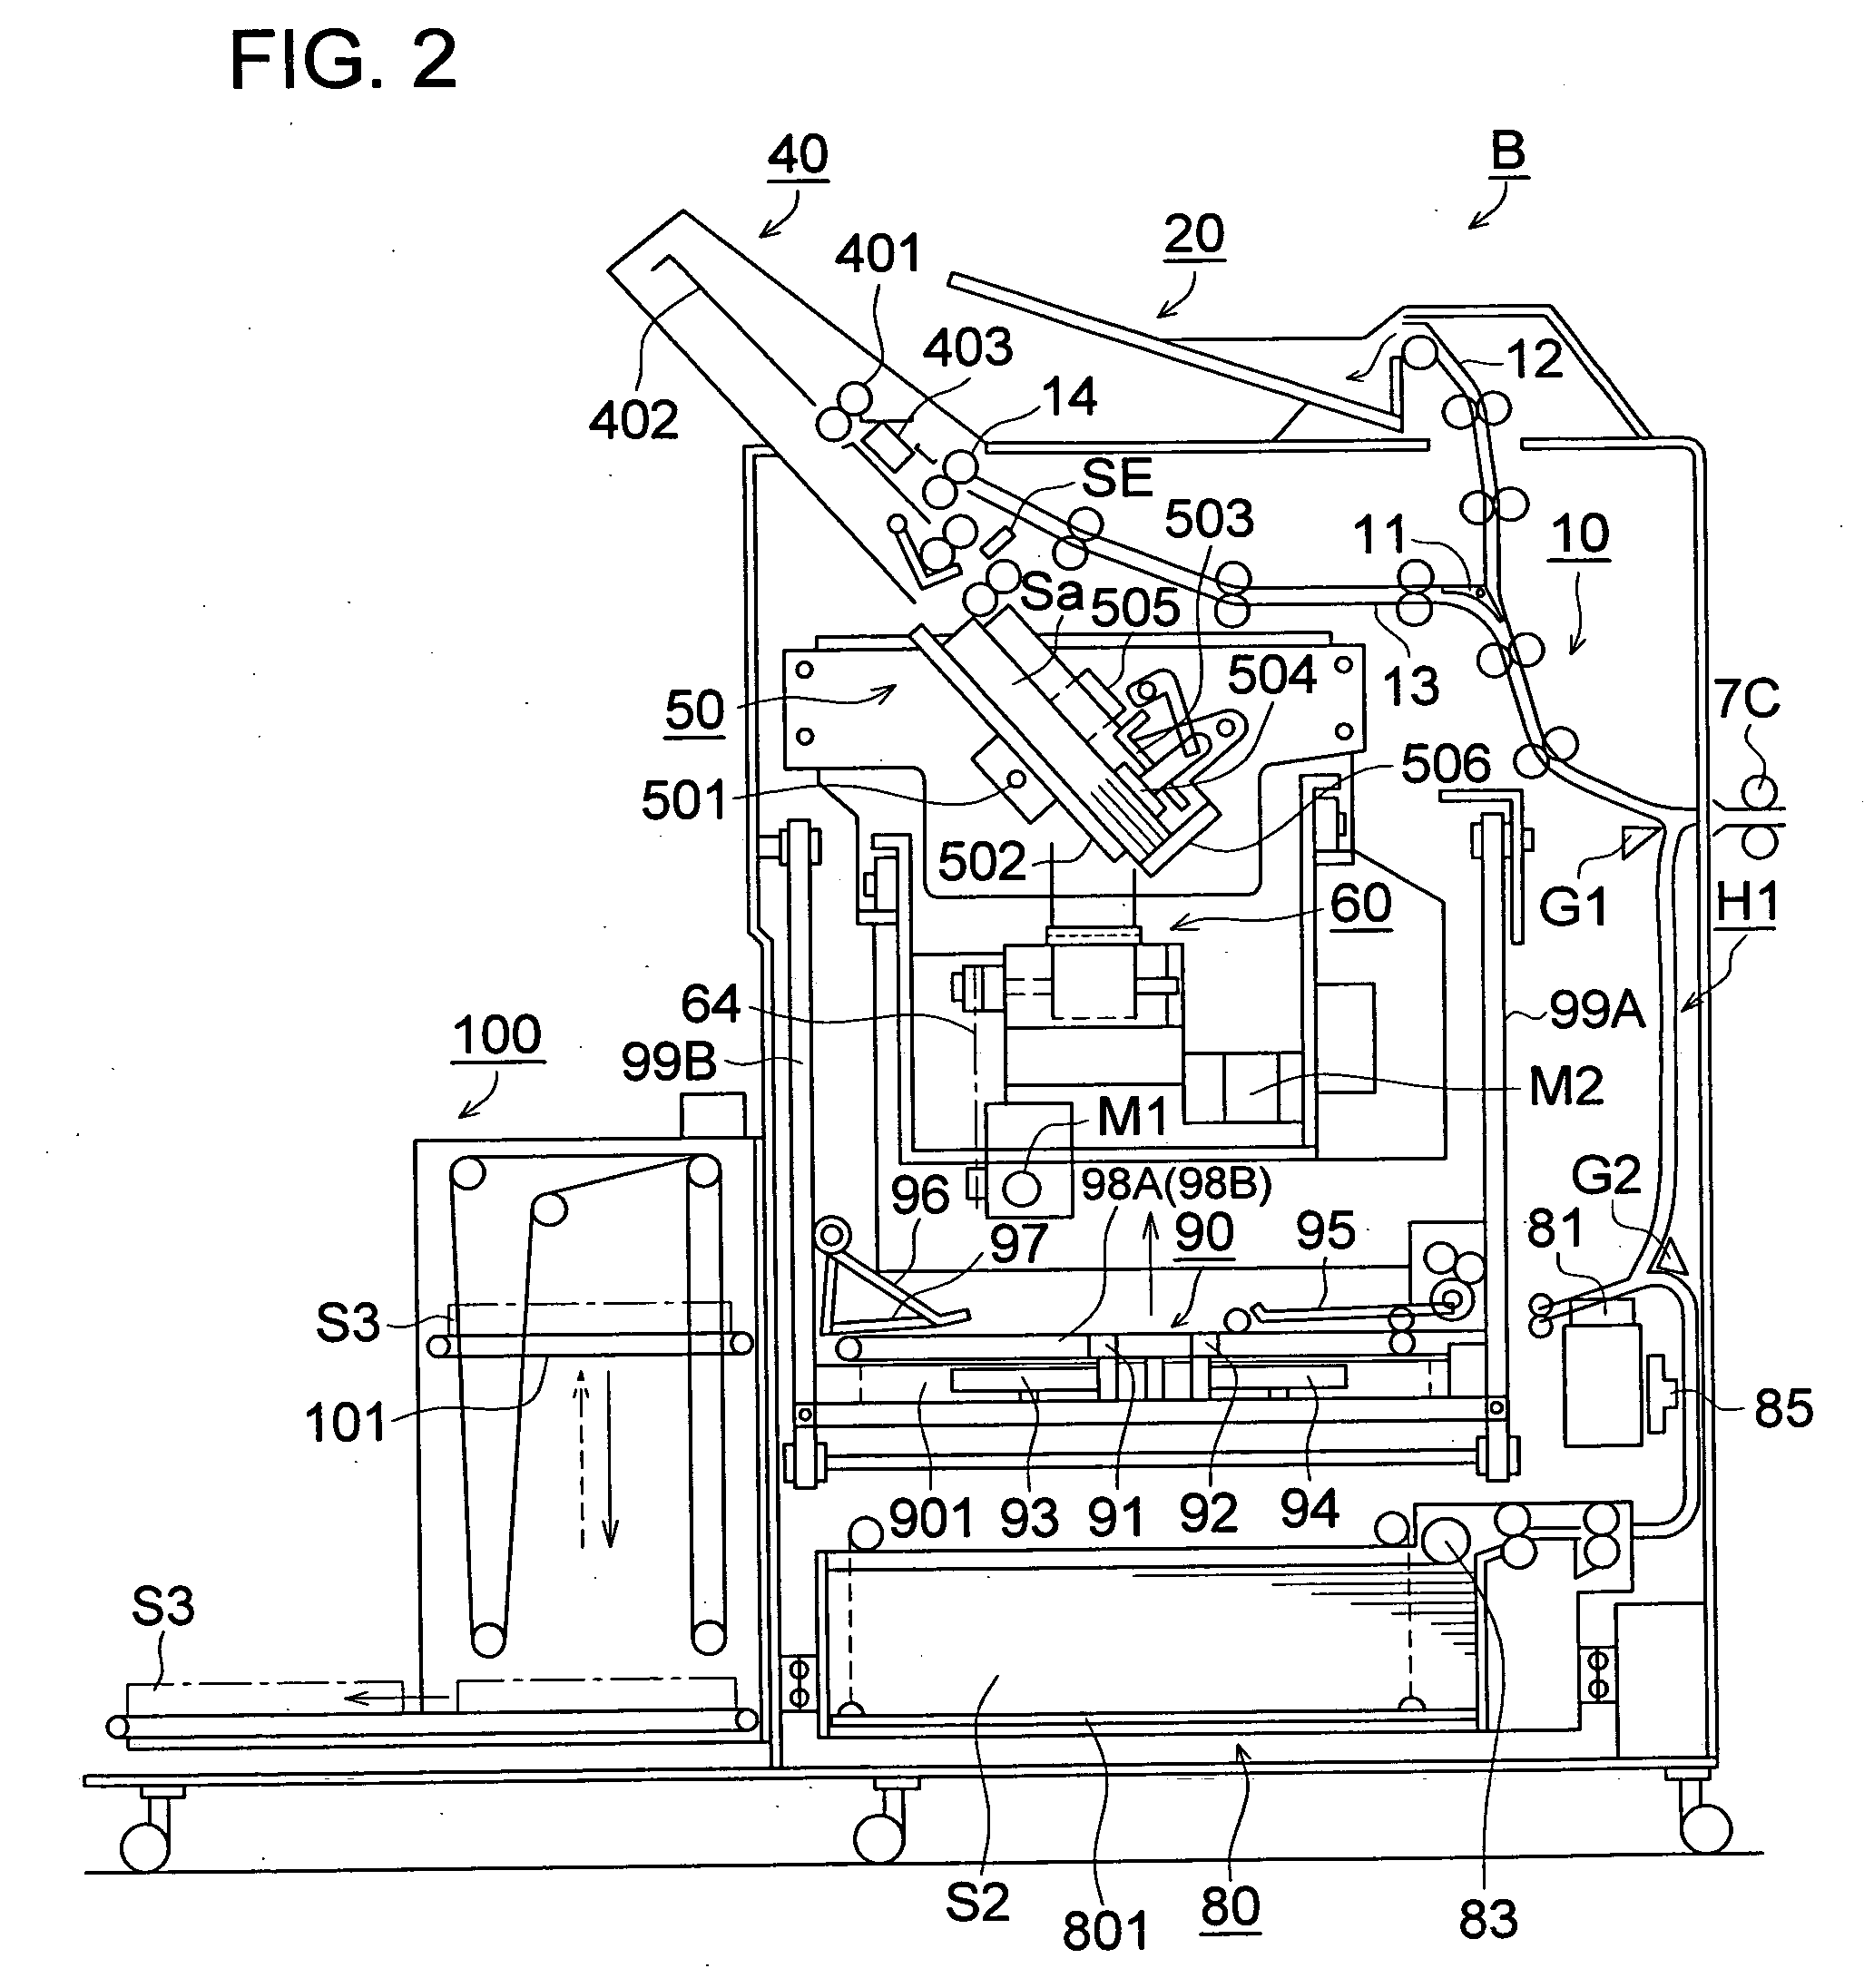 Bookbinding system, image forming apparatus, and bookbinding apparatus